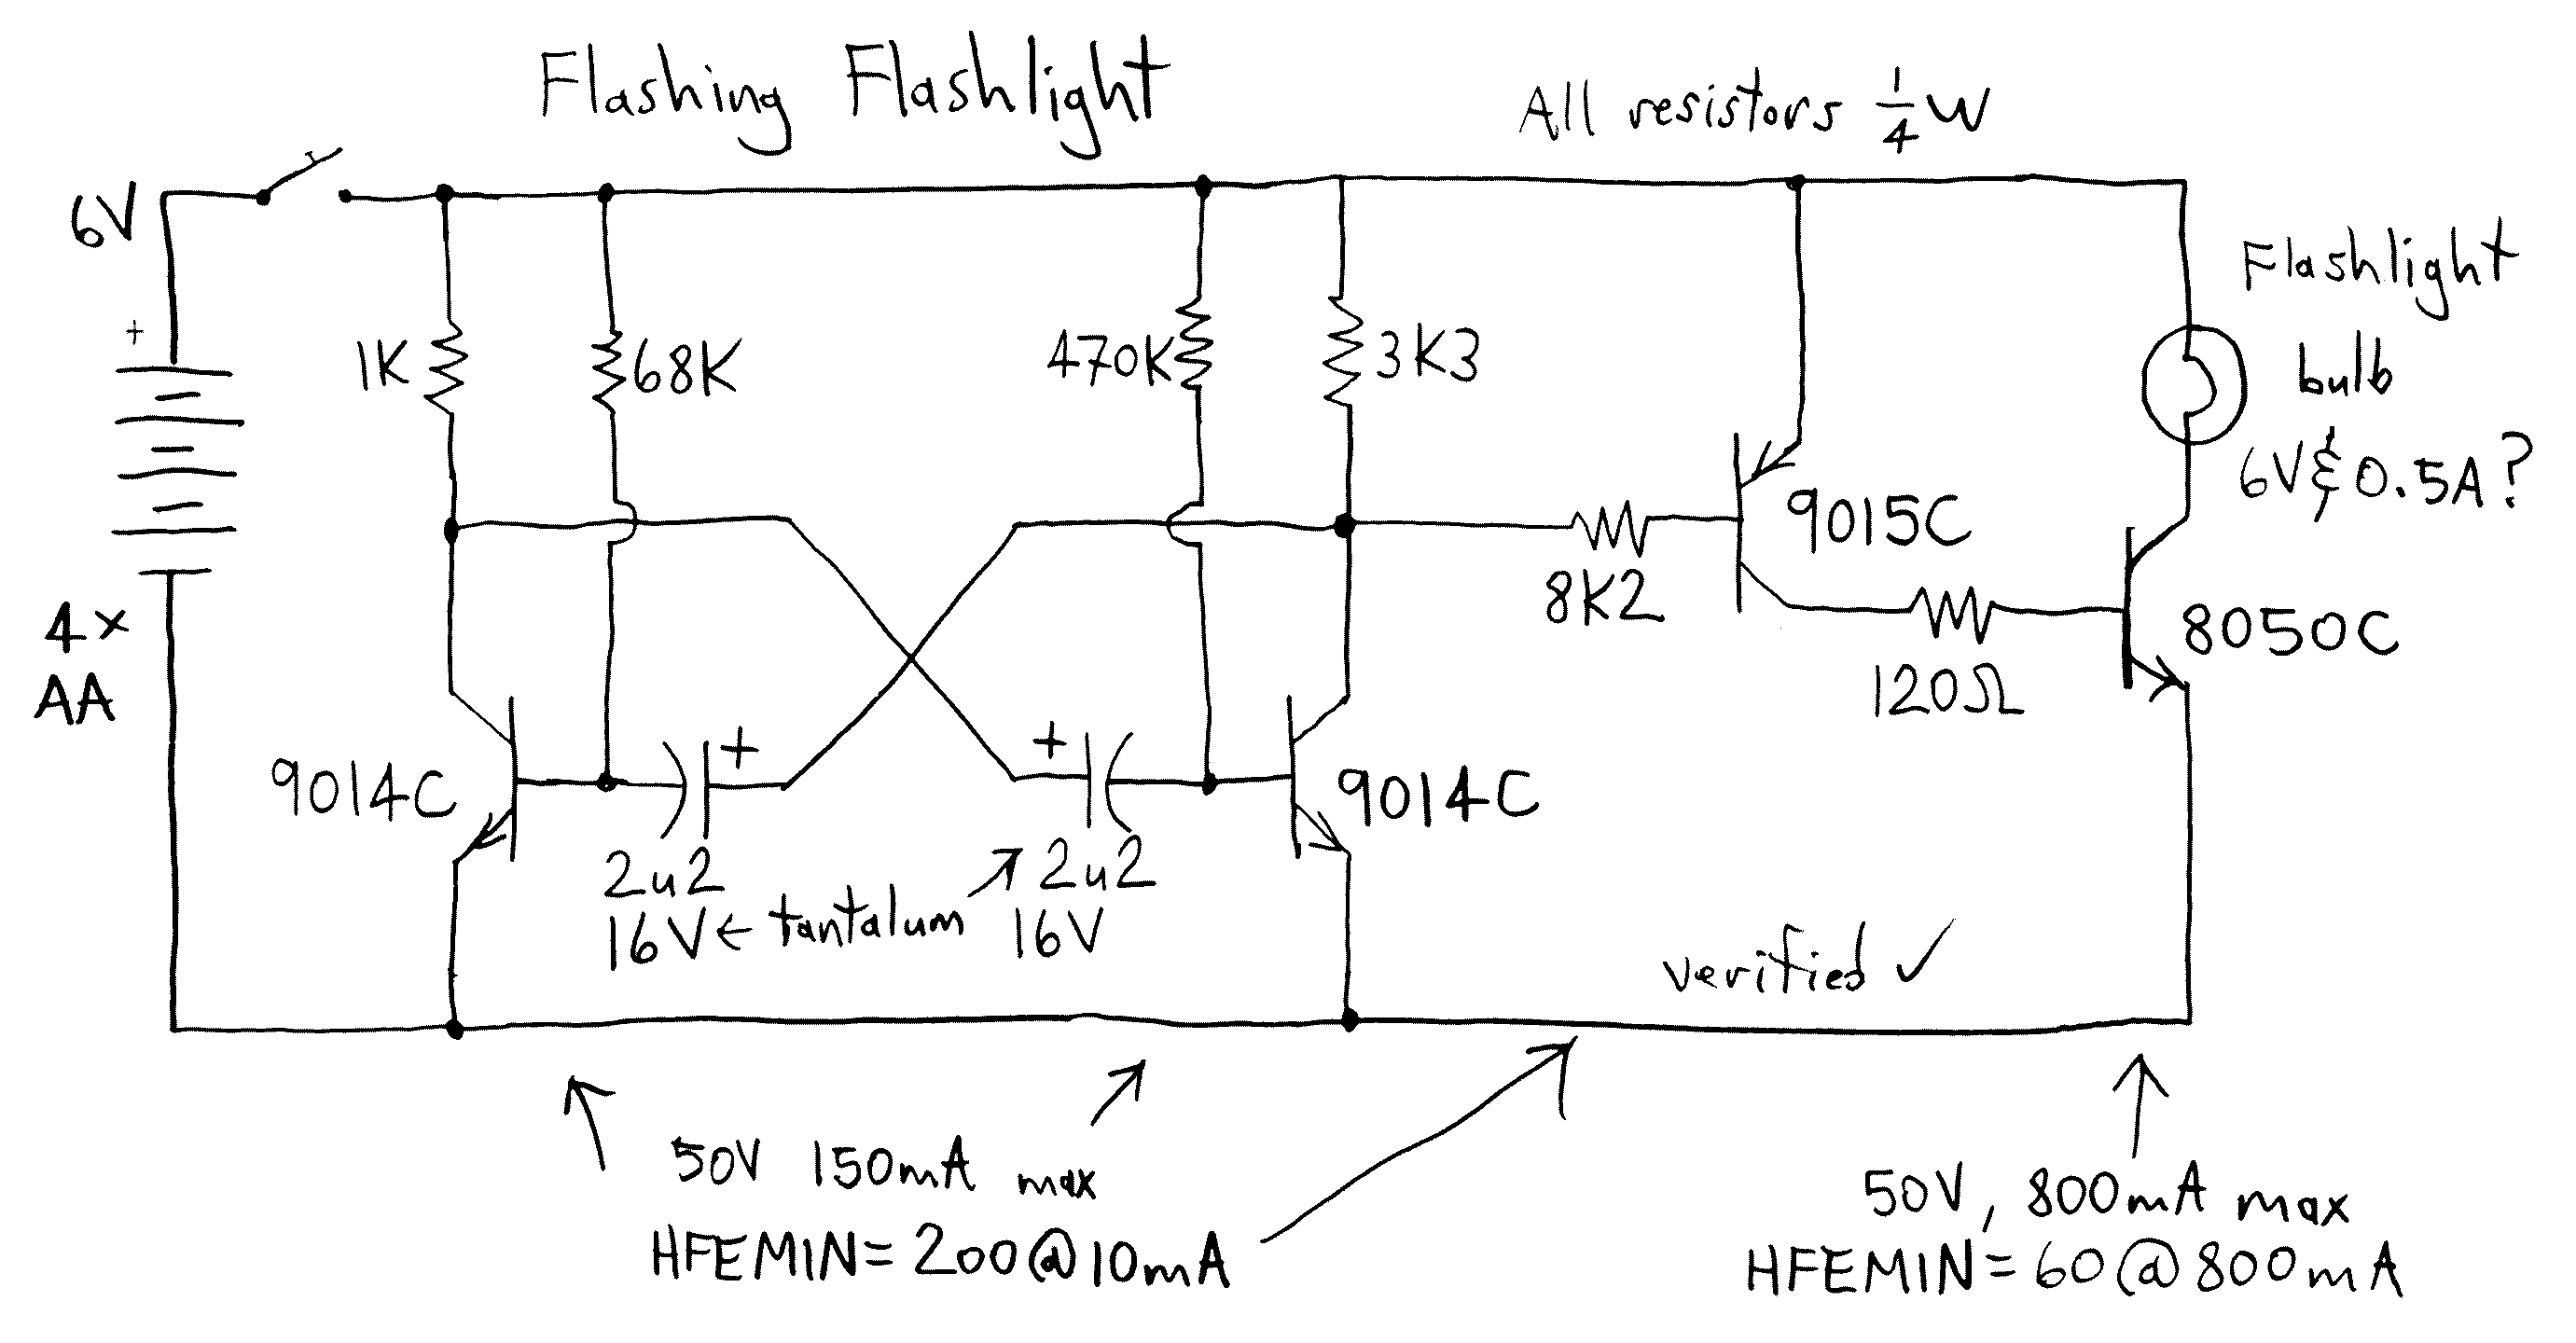 Circuit Diagram aka Schematic reverse engineered from circuit board